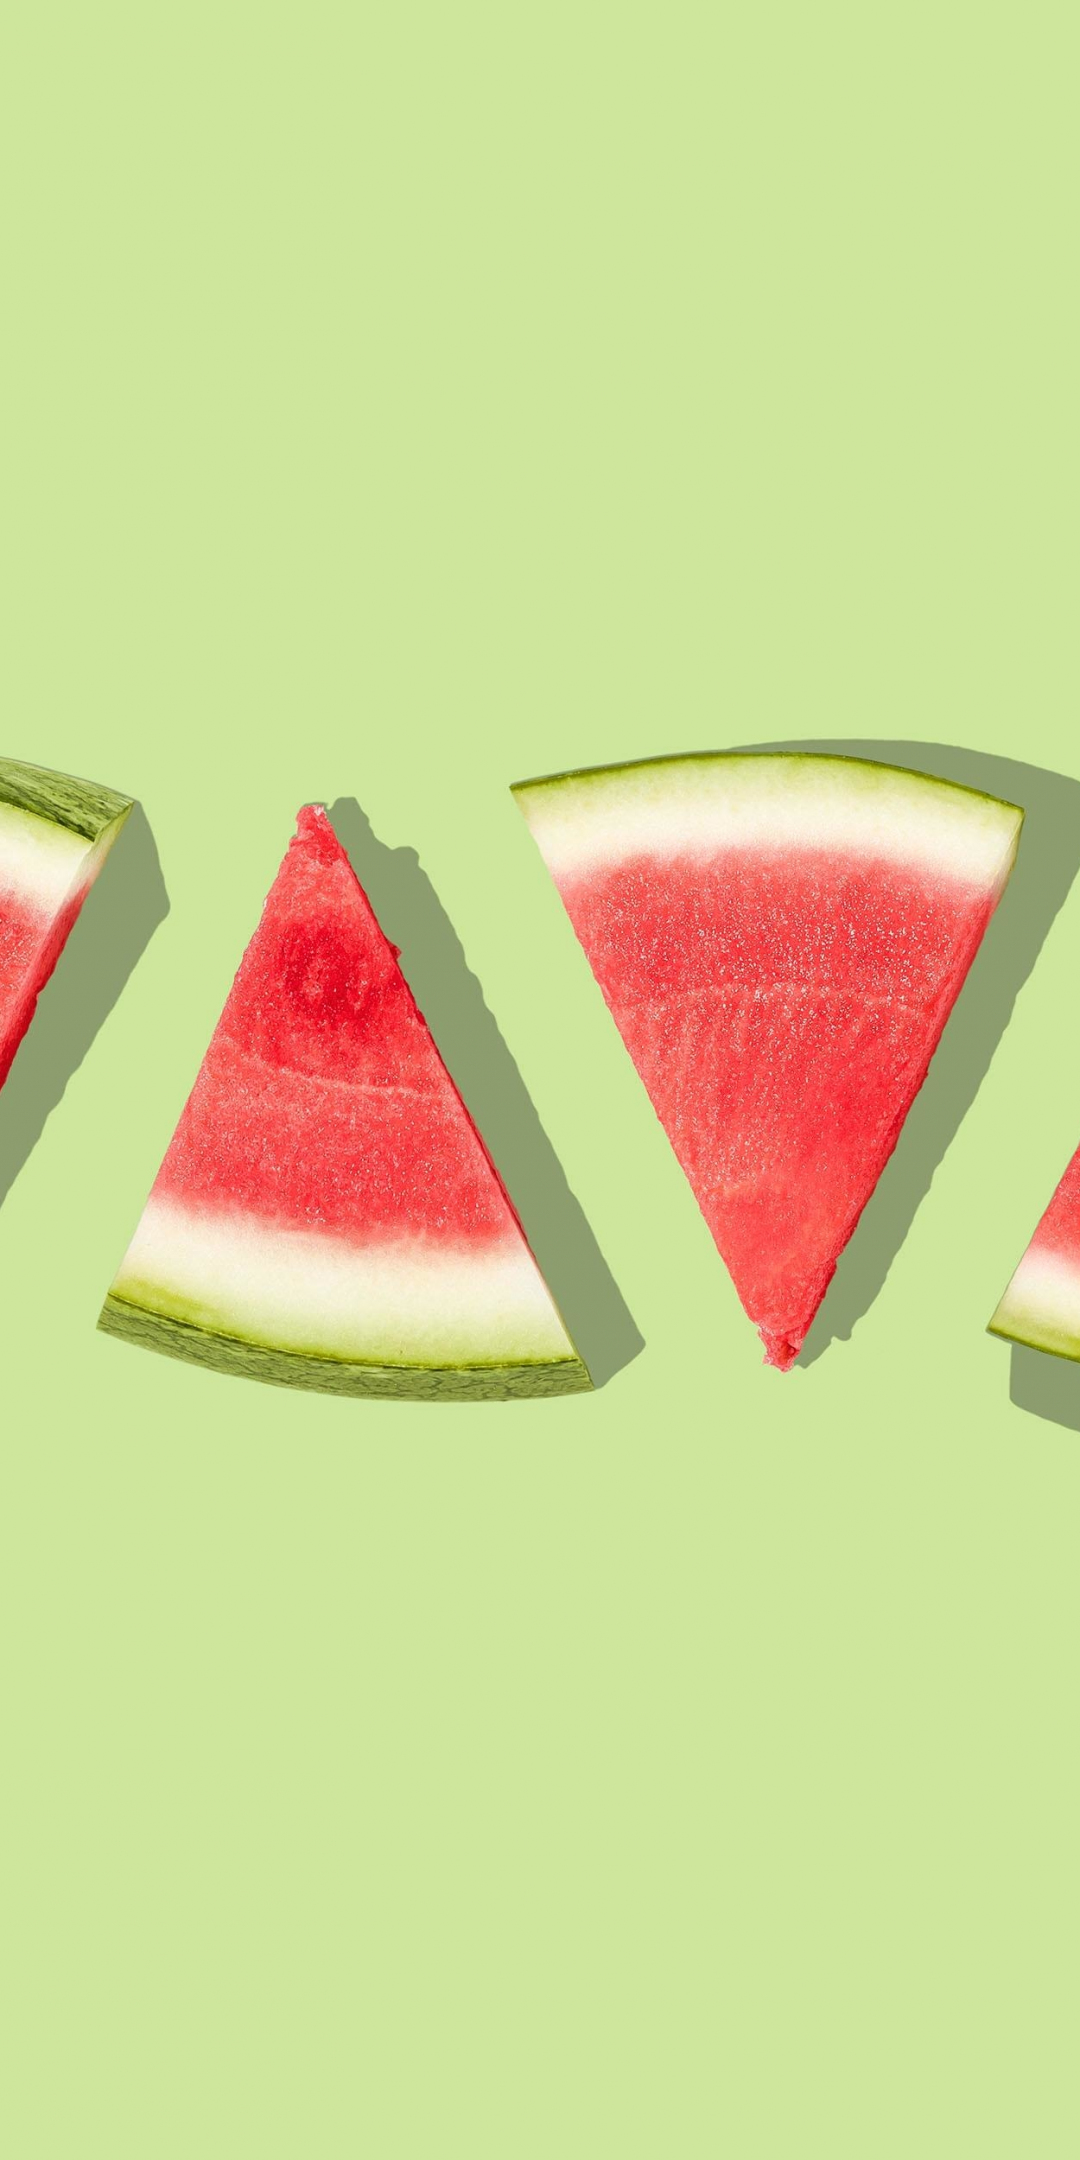 Slices of watermelon, fruit, 1080x2160 wallpaper